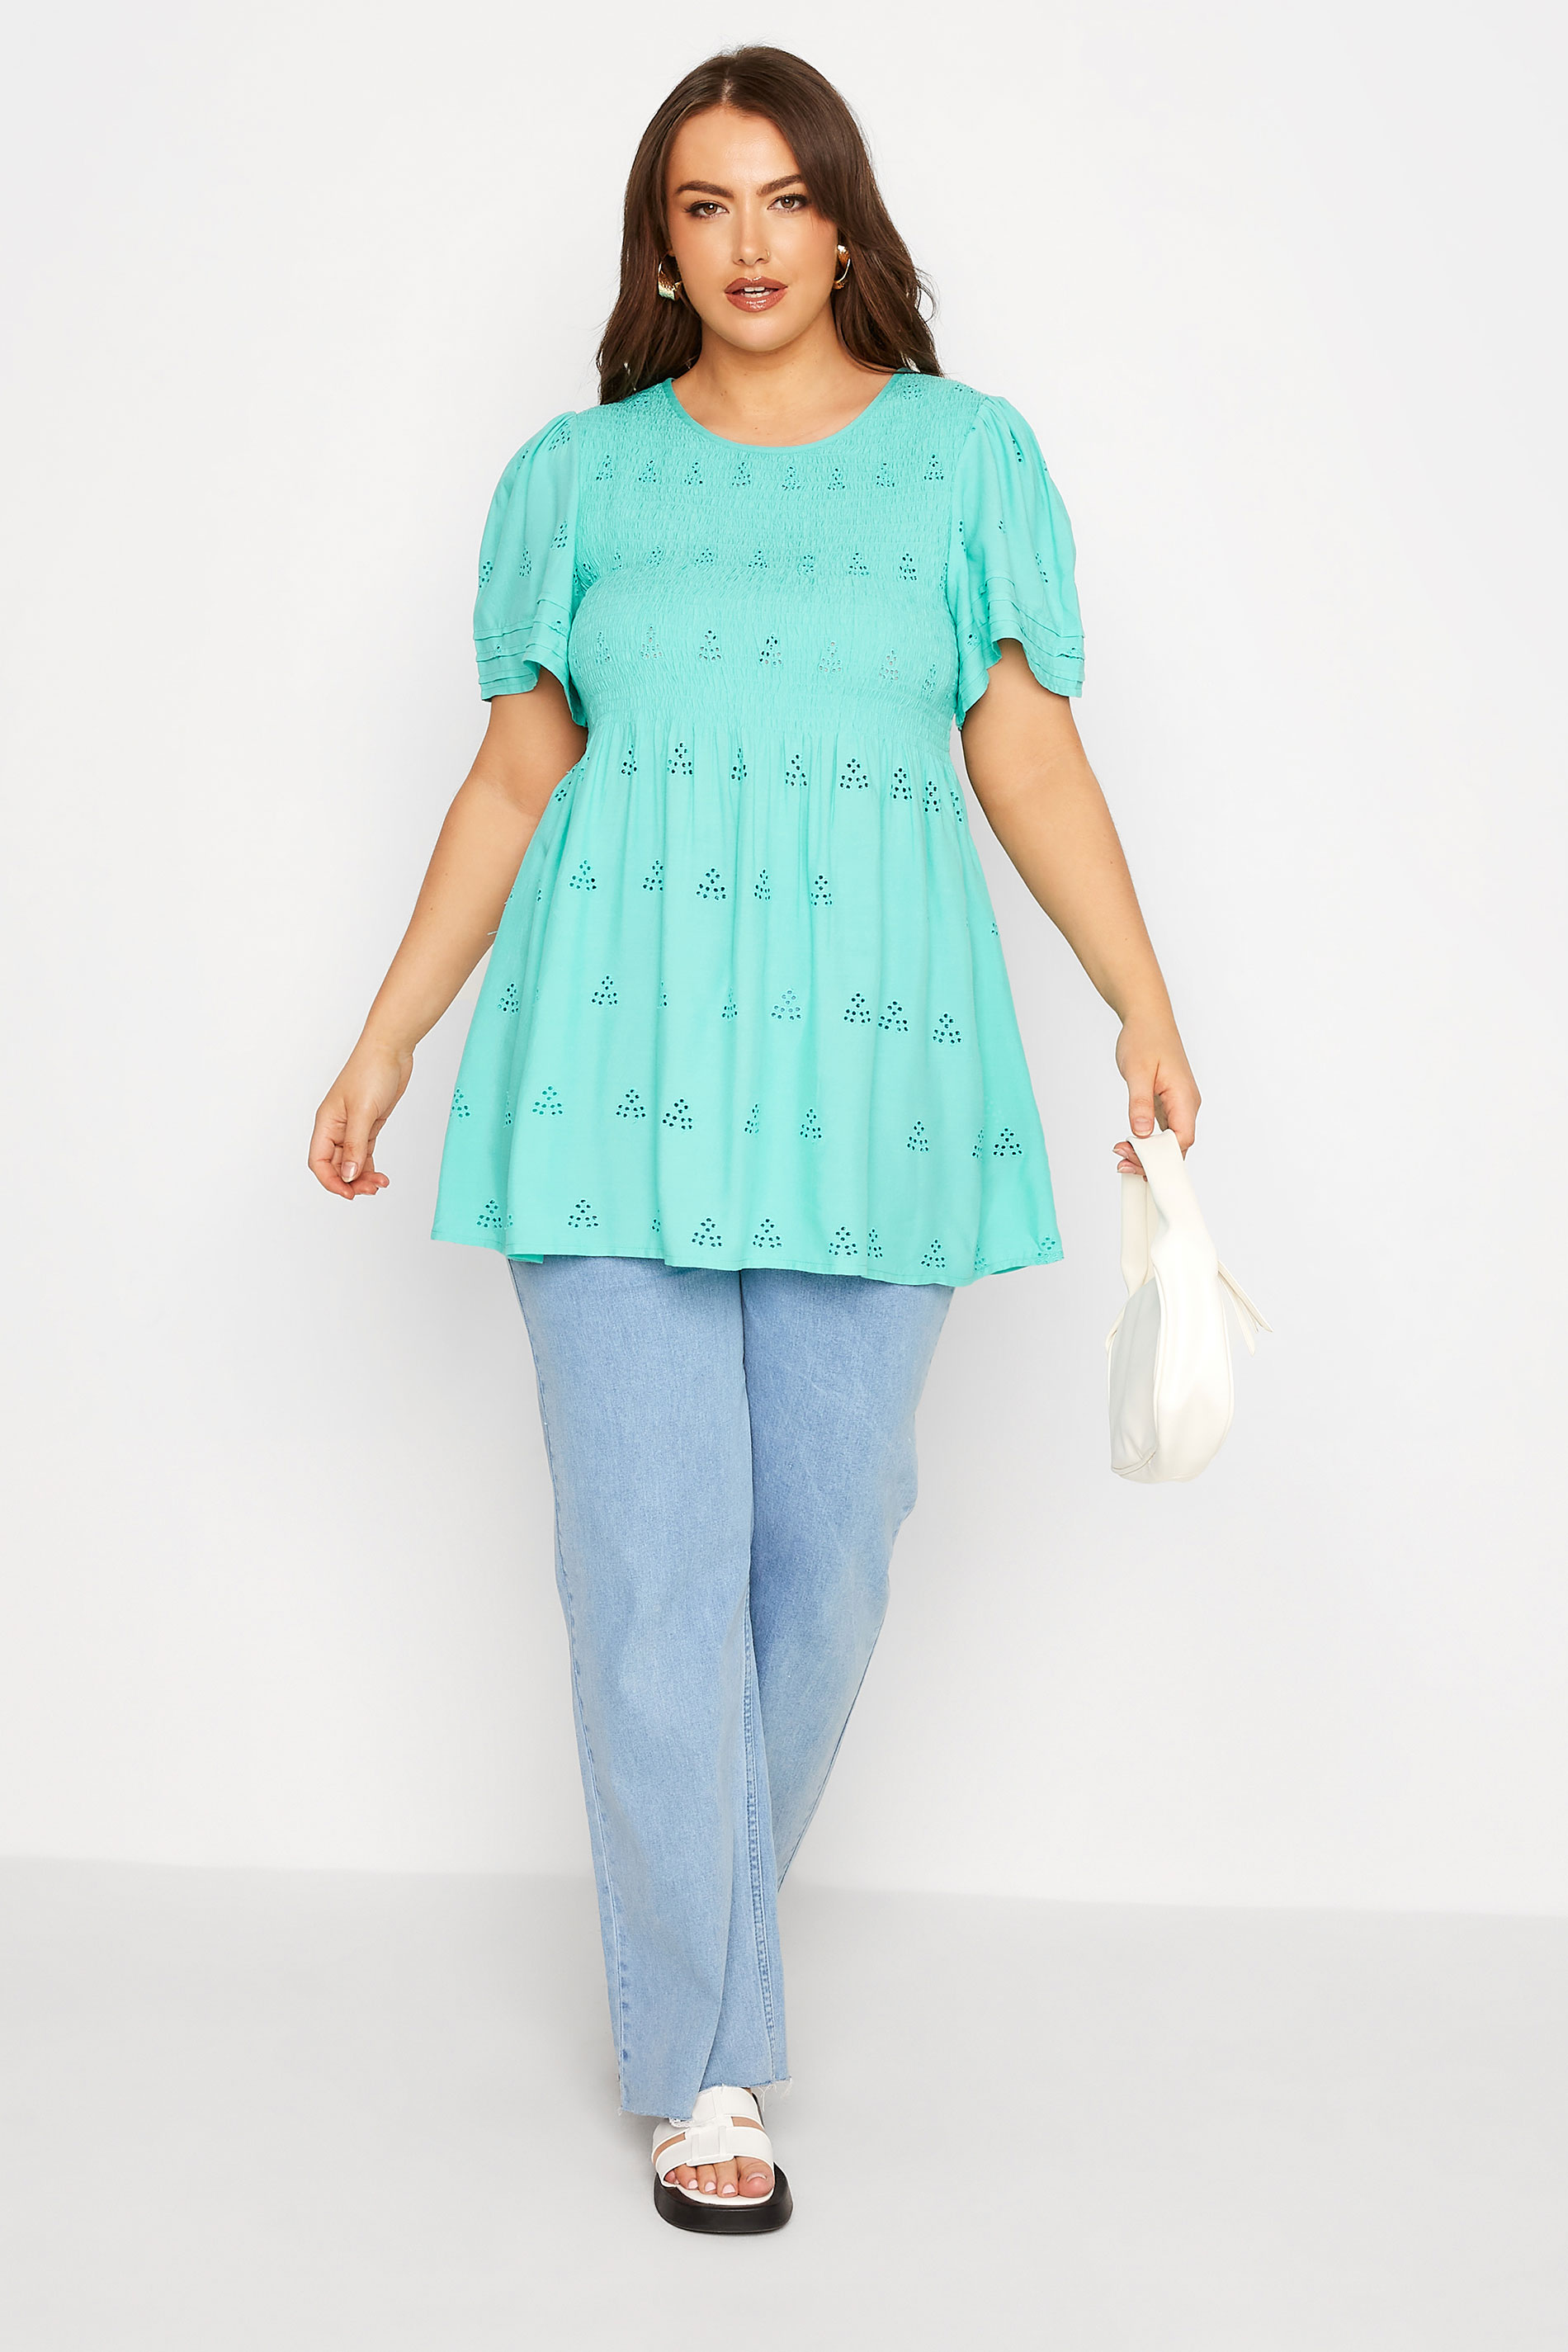 Grande taille  Tops Grande taille  Blouses & Chemisiers | LIMITED COLLECTION - Top Bleu-Vert Design Brodé - PU34412